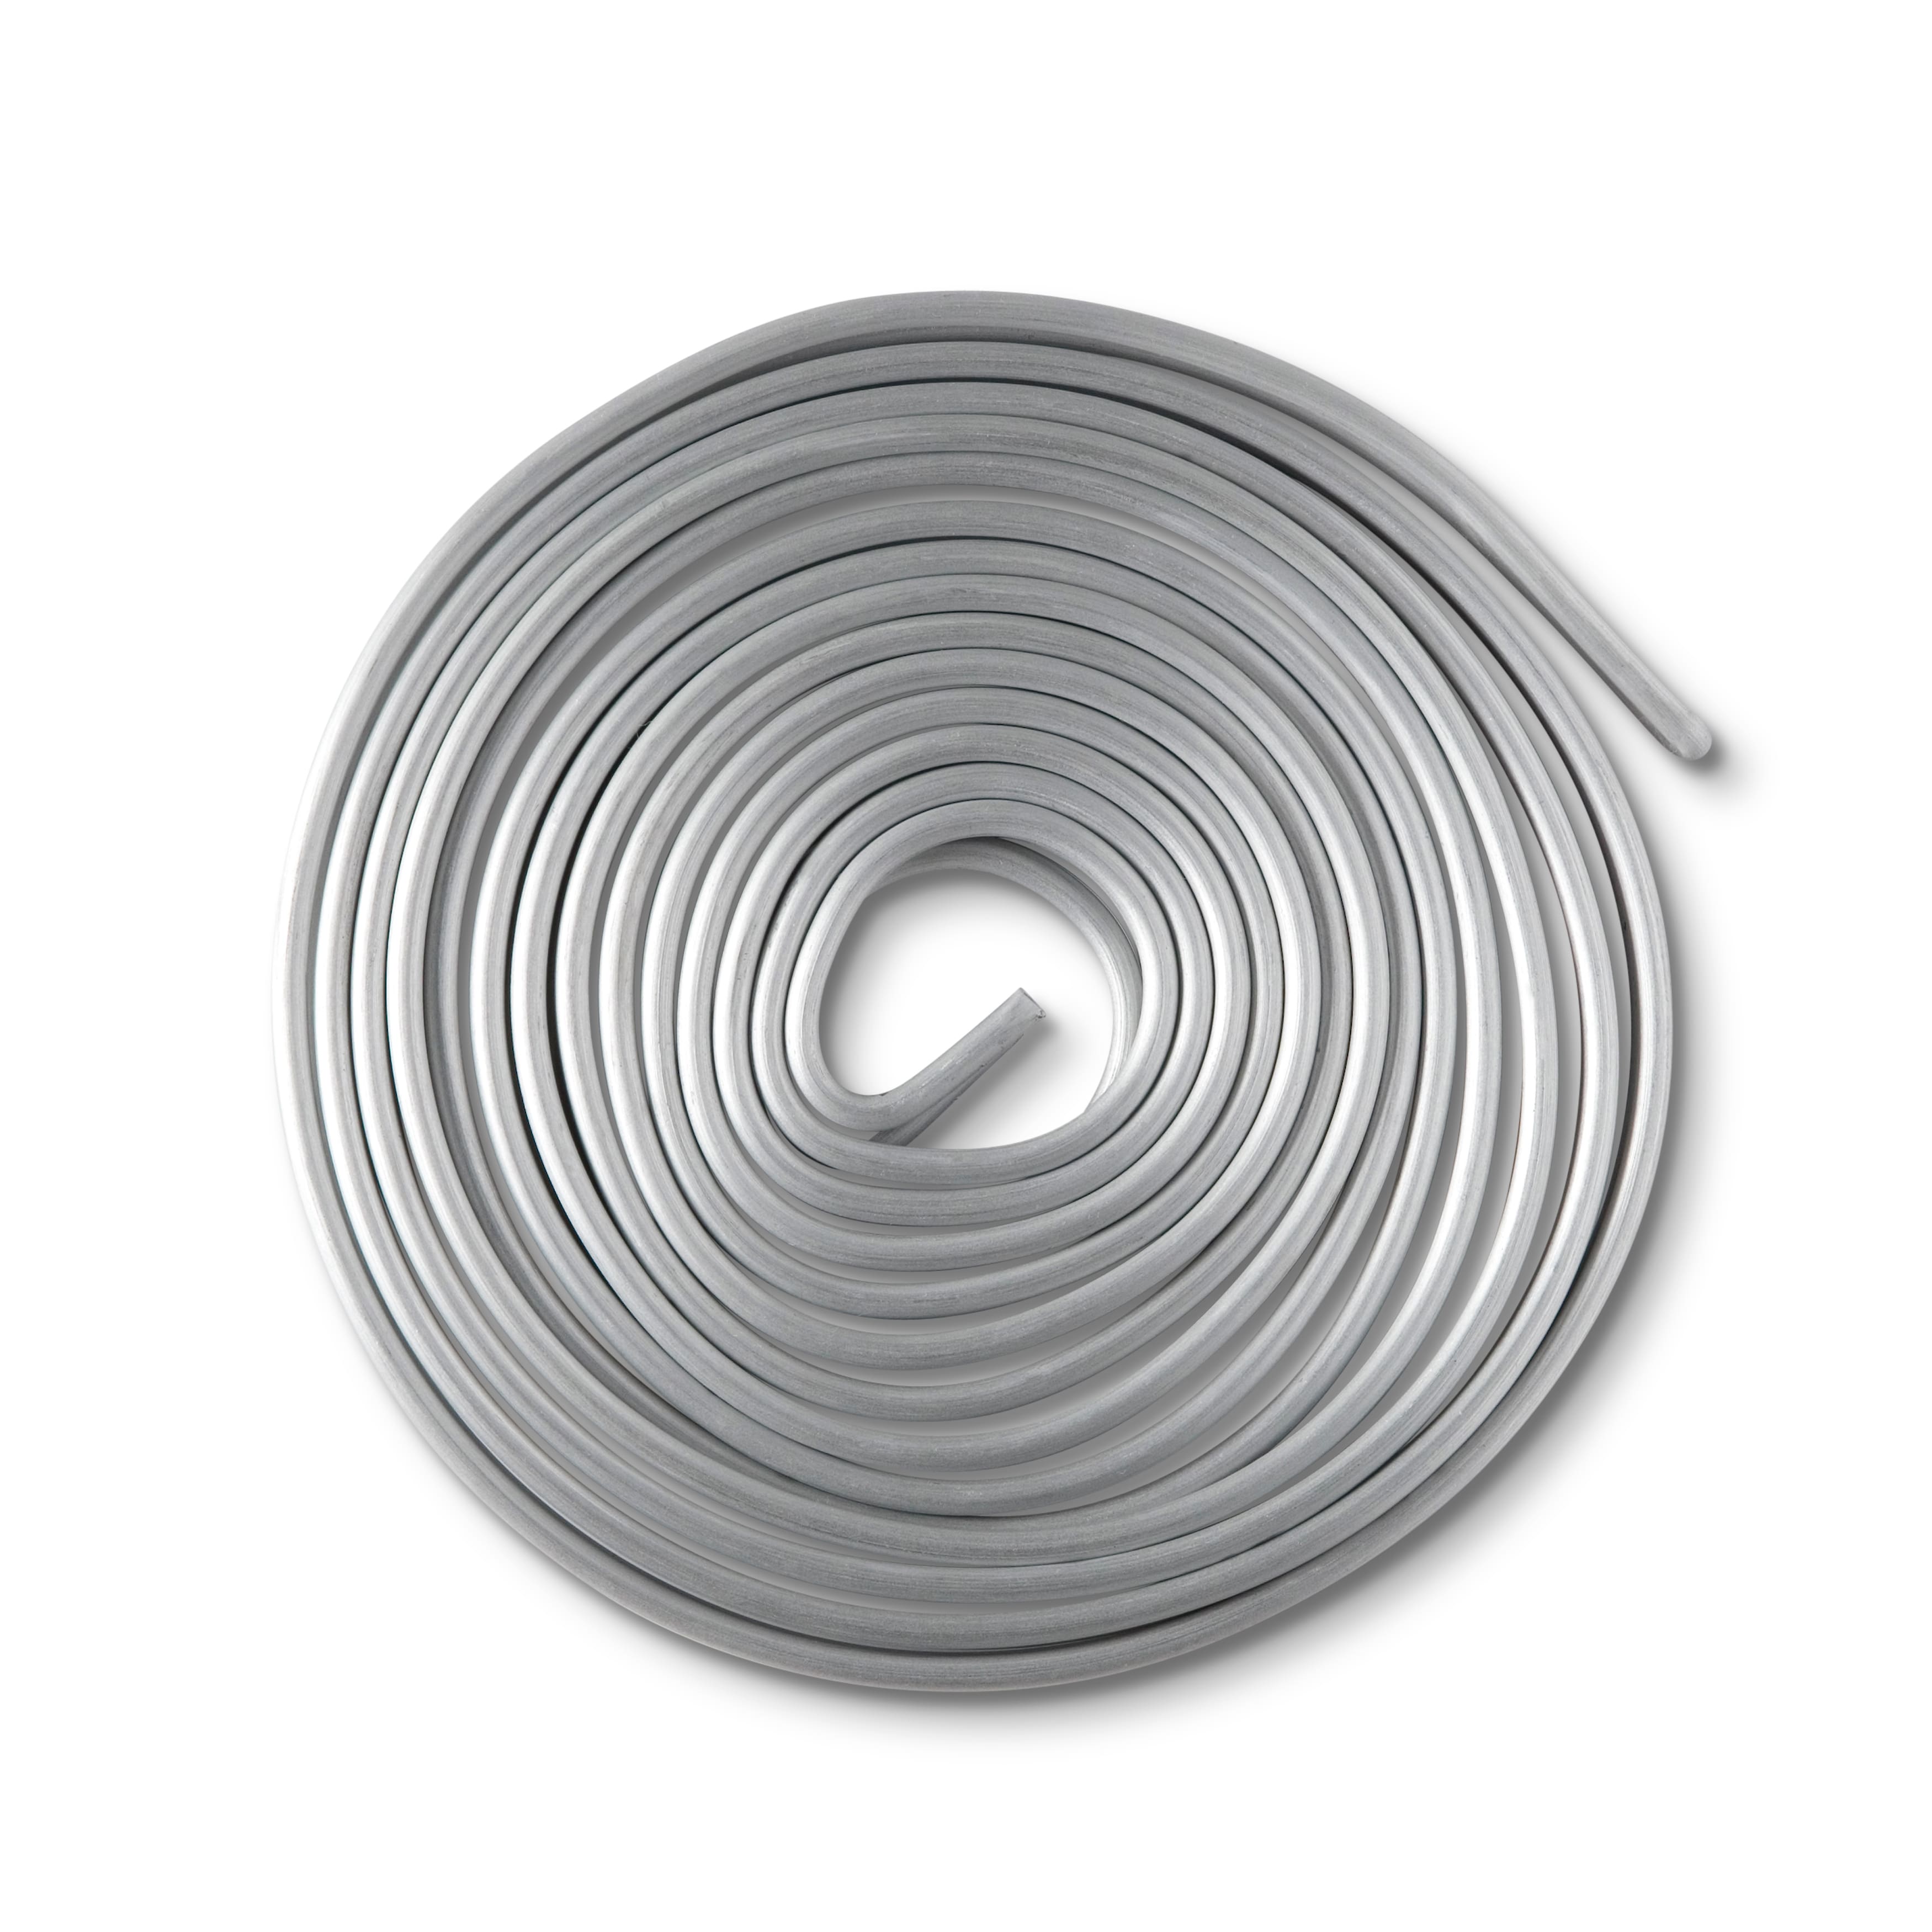 Premium Sculpting &#x26; Armature Wire By Craft Smart&#xAE;, 0.13&#x22; x 20ft